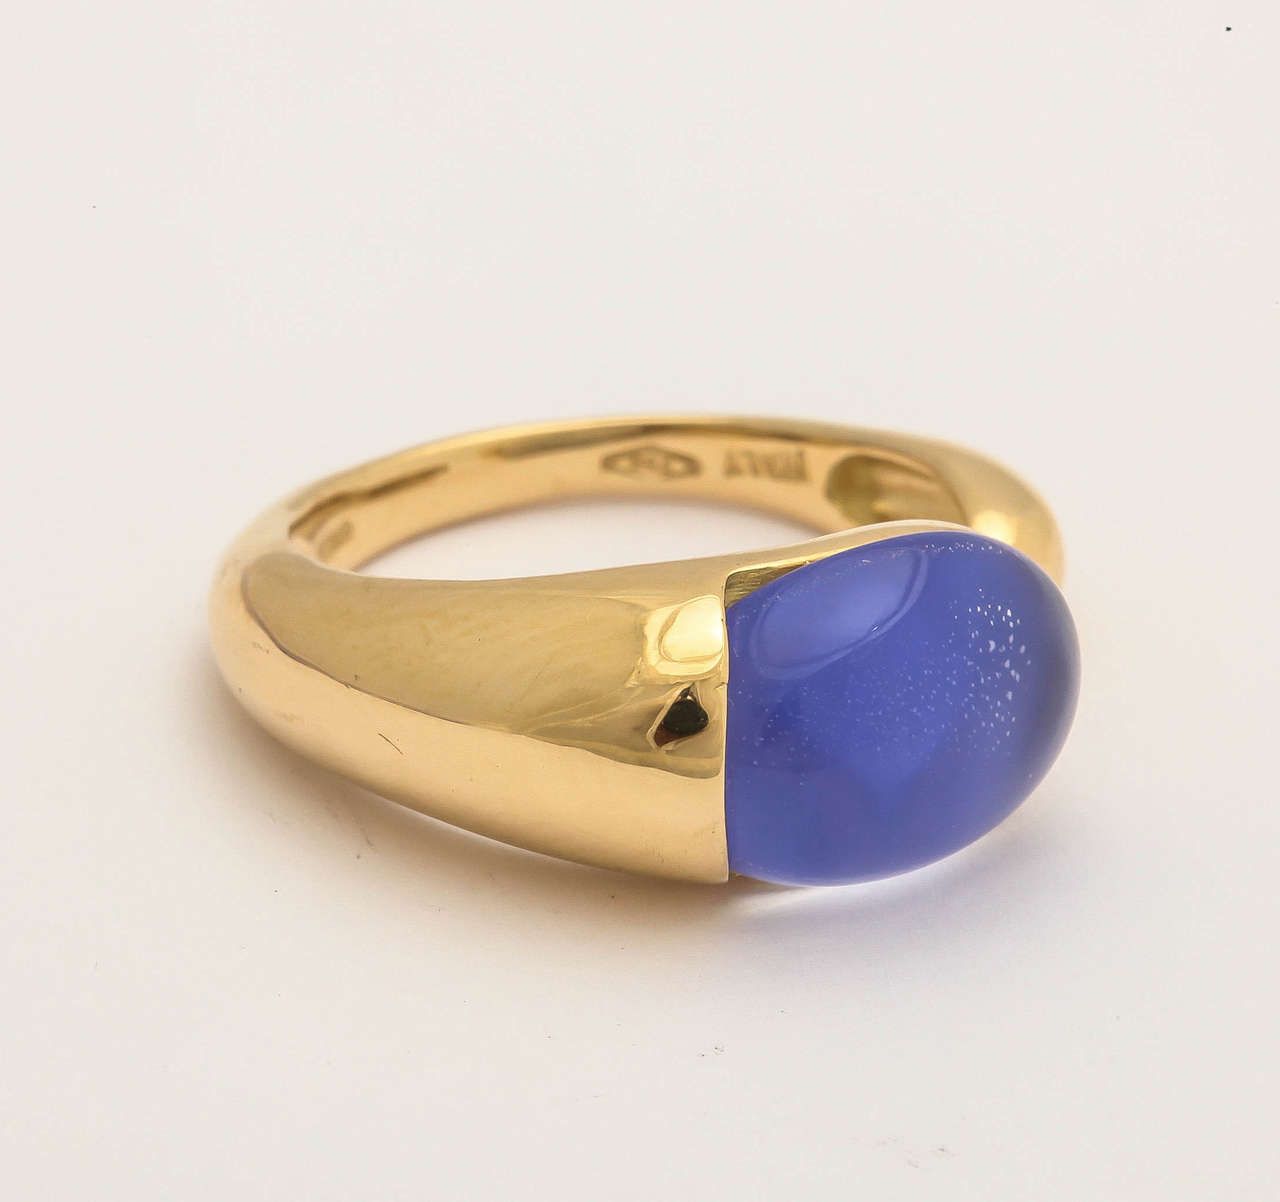 18Kt yellow gold Gocce ring with blue agate rock crystal.